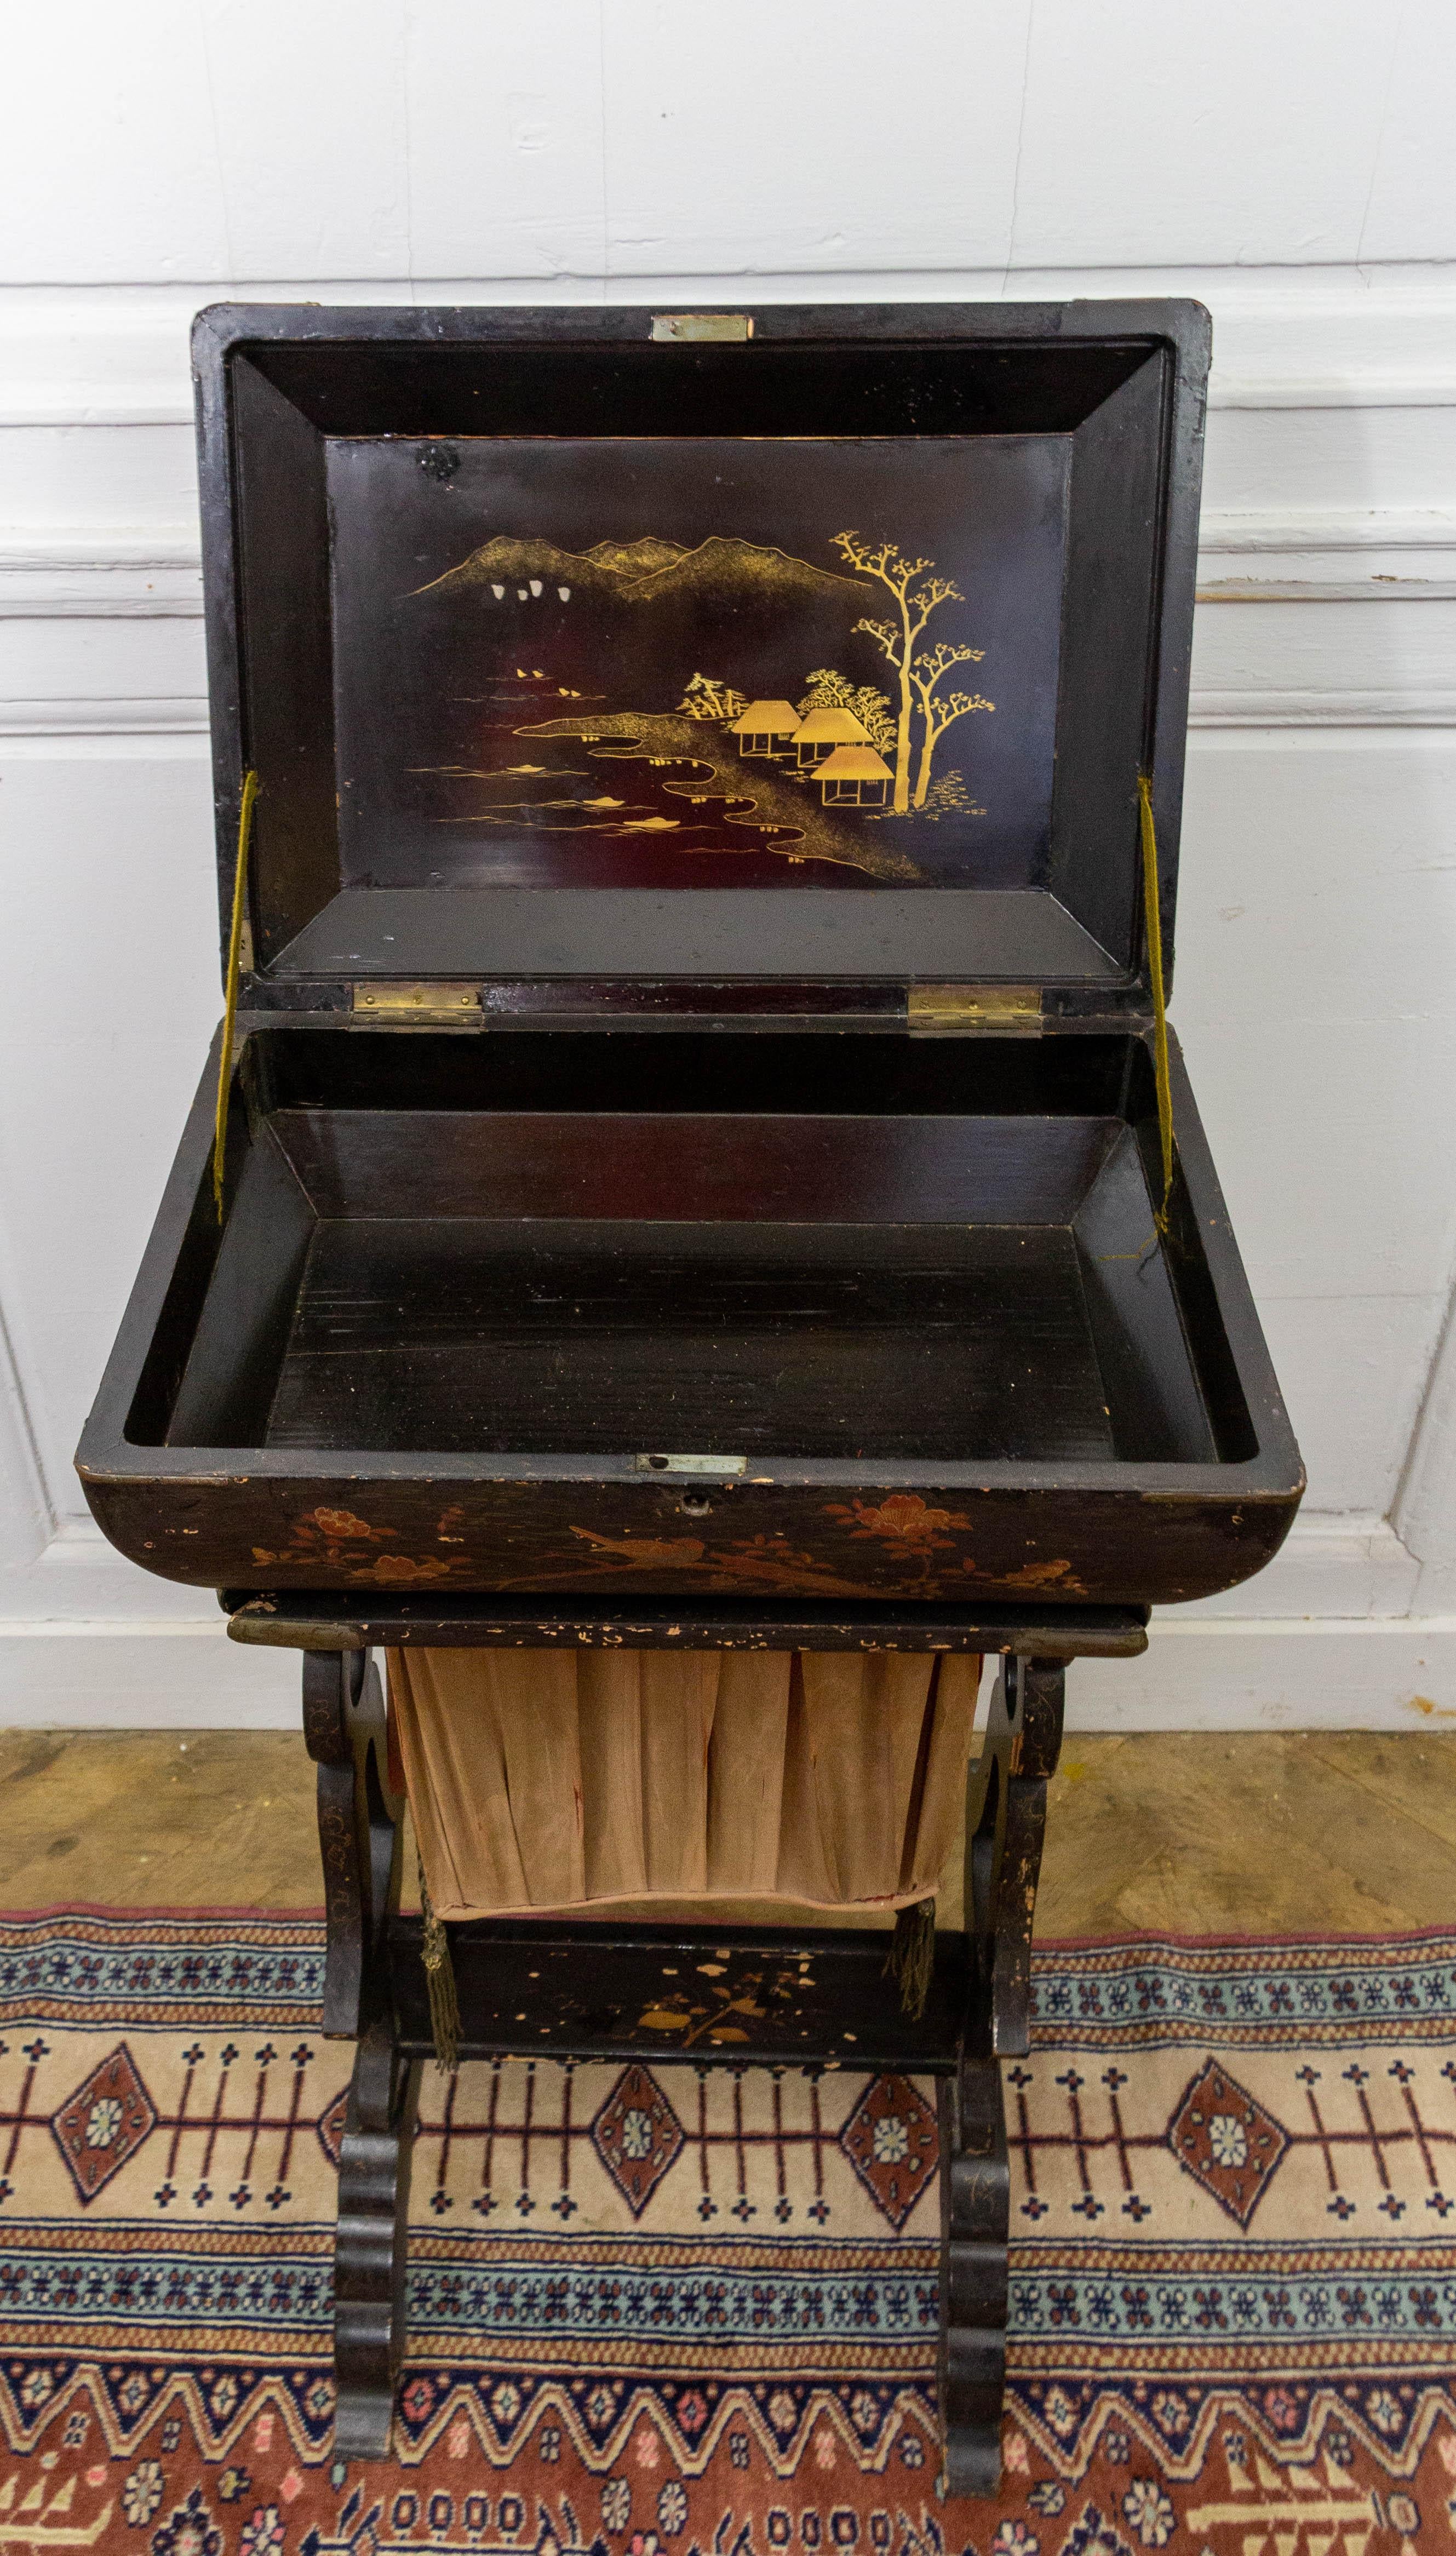 This Asian-inspired lacquered wooden work table is a beautiful expandable sewing box covered with lacquer on all sides. On the upper part, intended to receive the sewing material, the sides are decorated with birds, branches and flowers. The top is